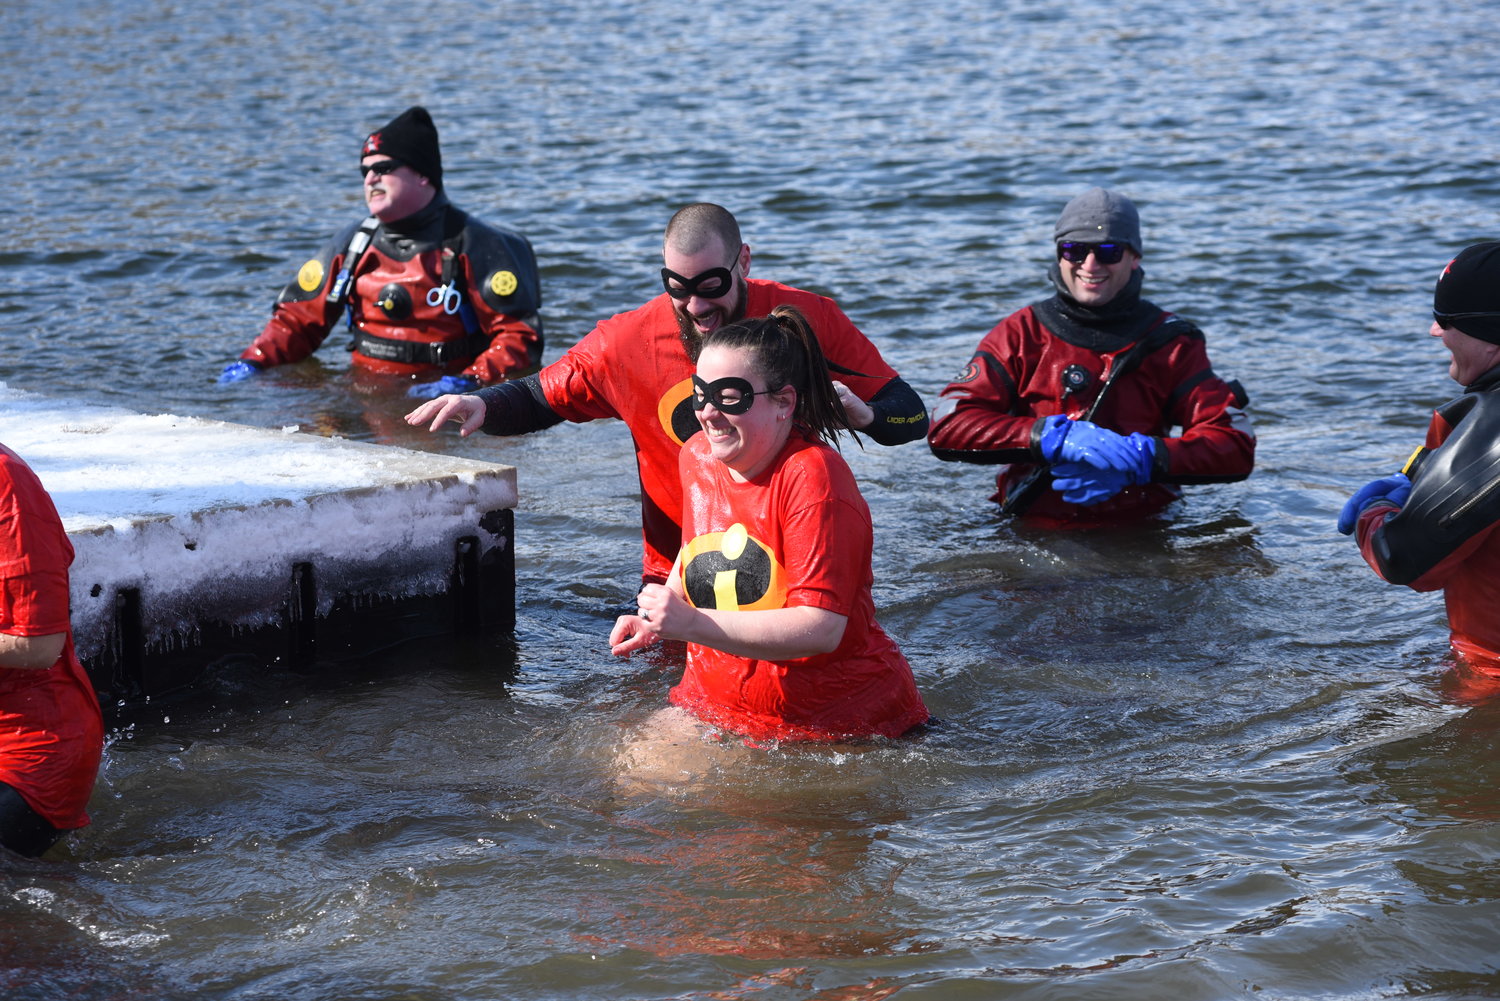 Braving a frigid morning with temperatures in the teens, 16 teams jumped into the lake.